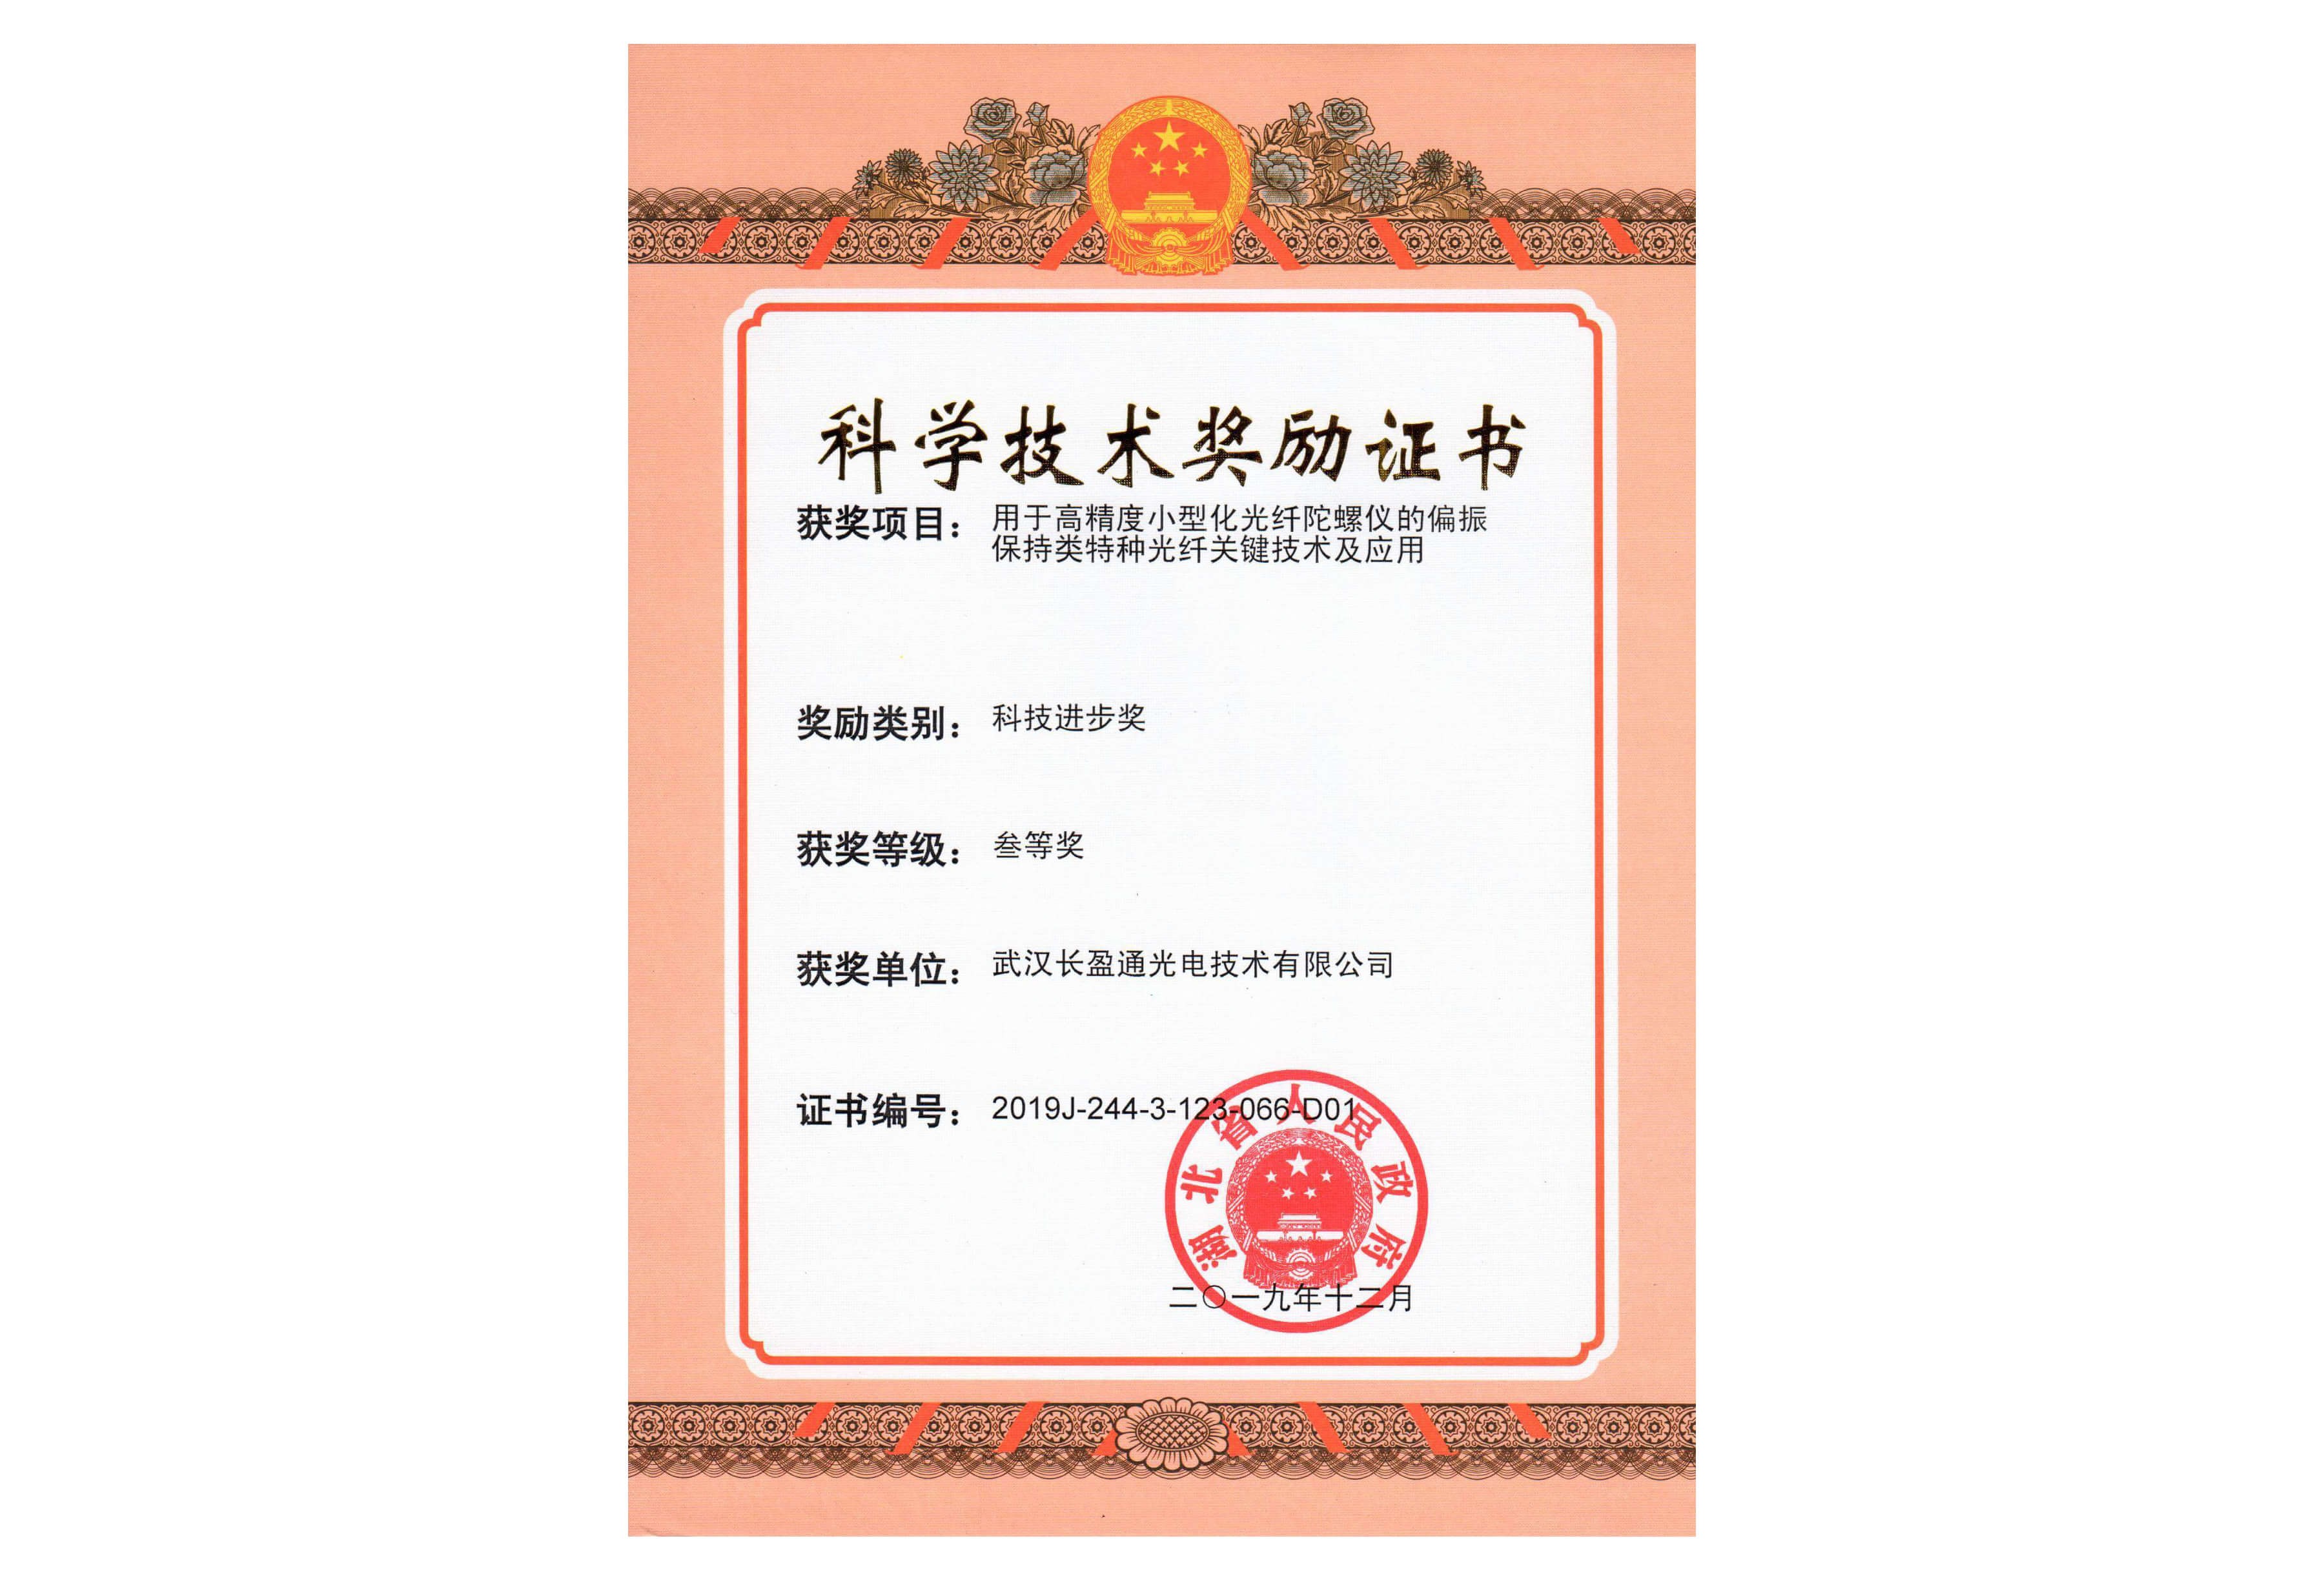 The third prize of “Science and Technology Progress Award” in Hubei Province